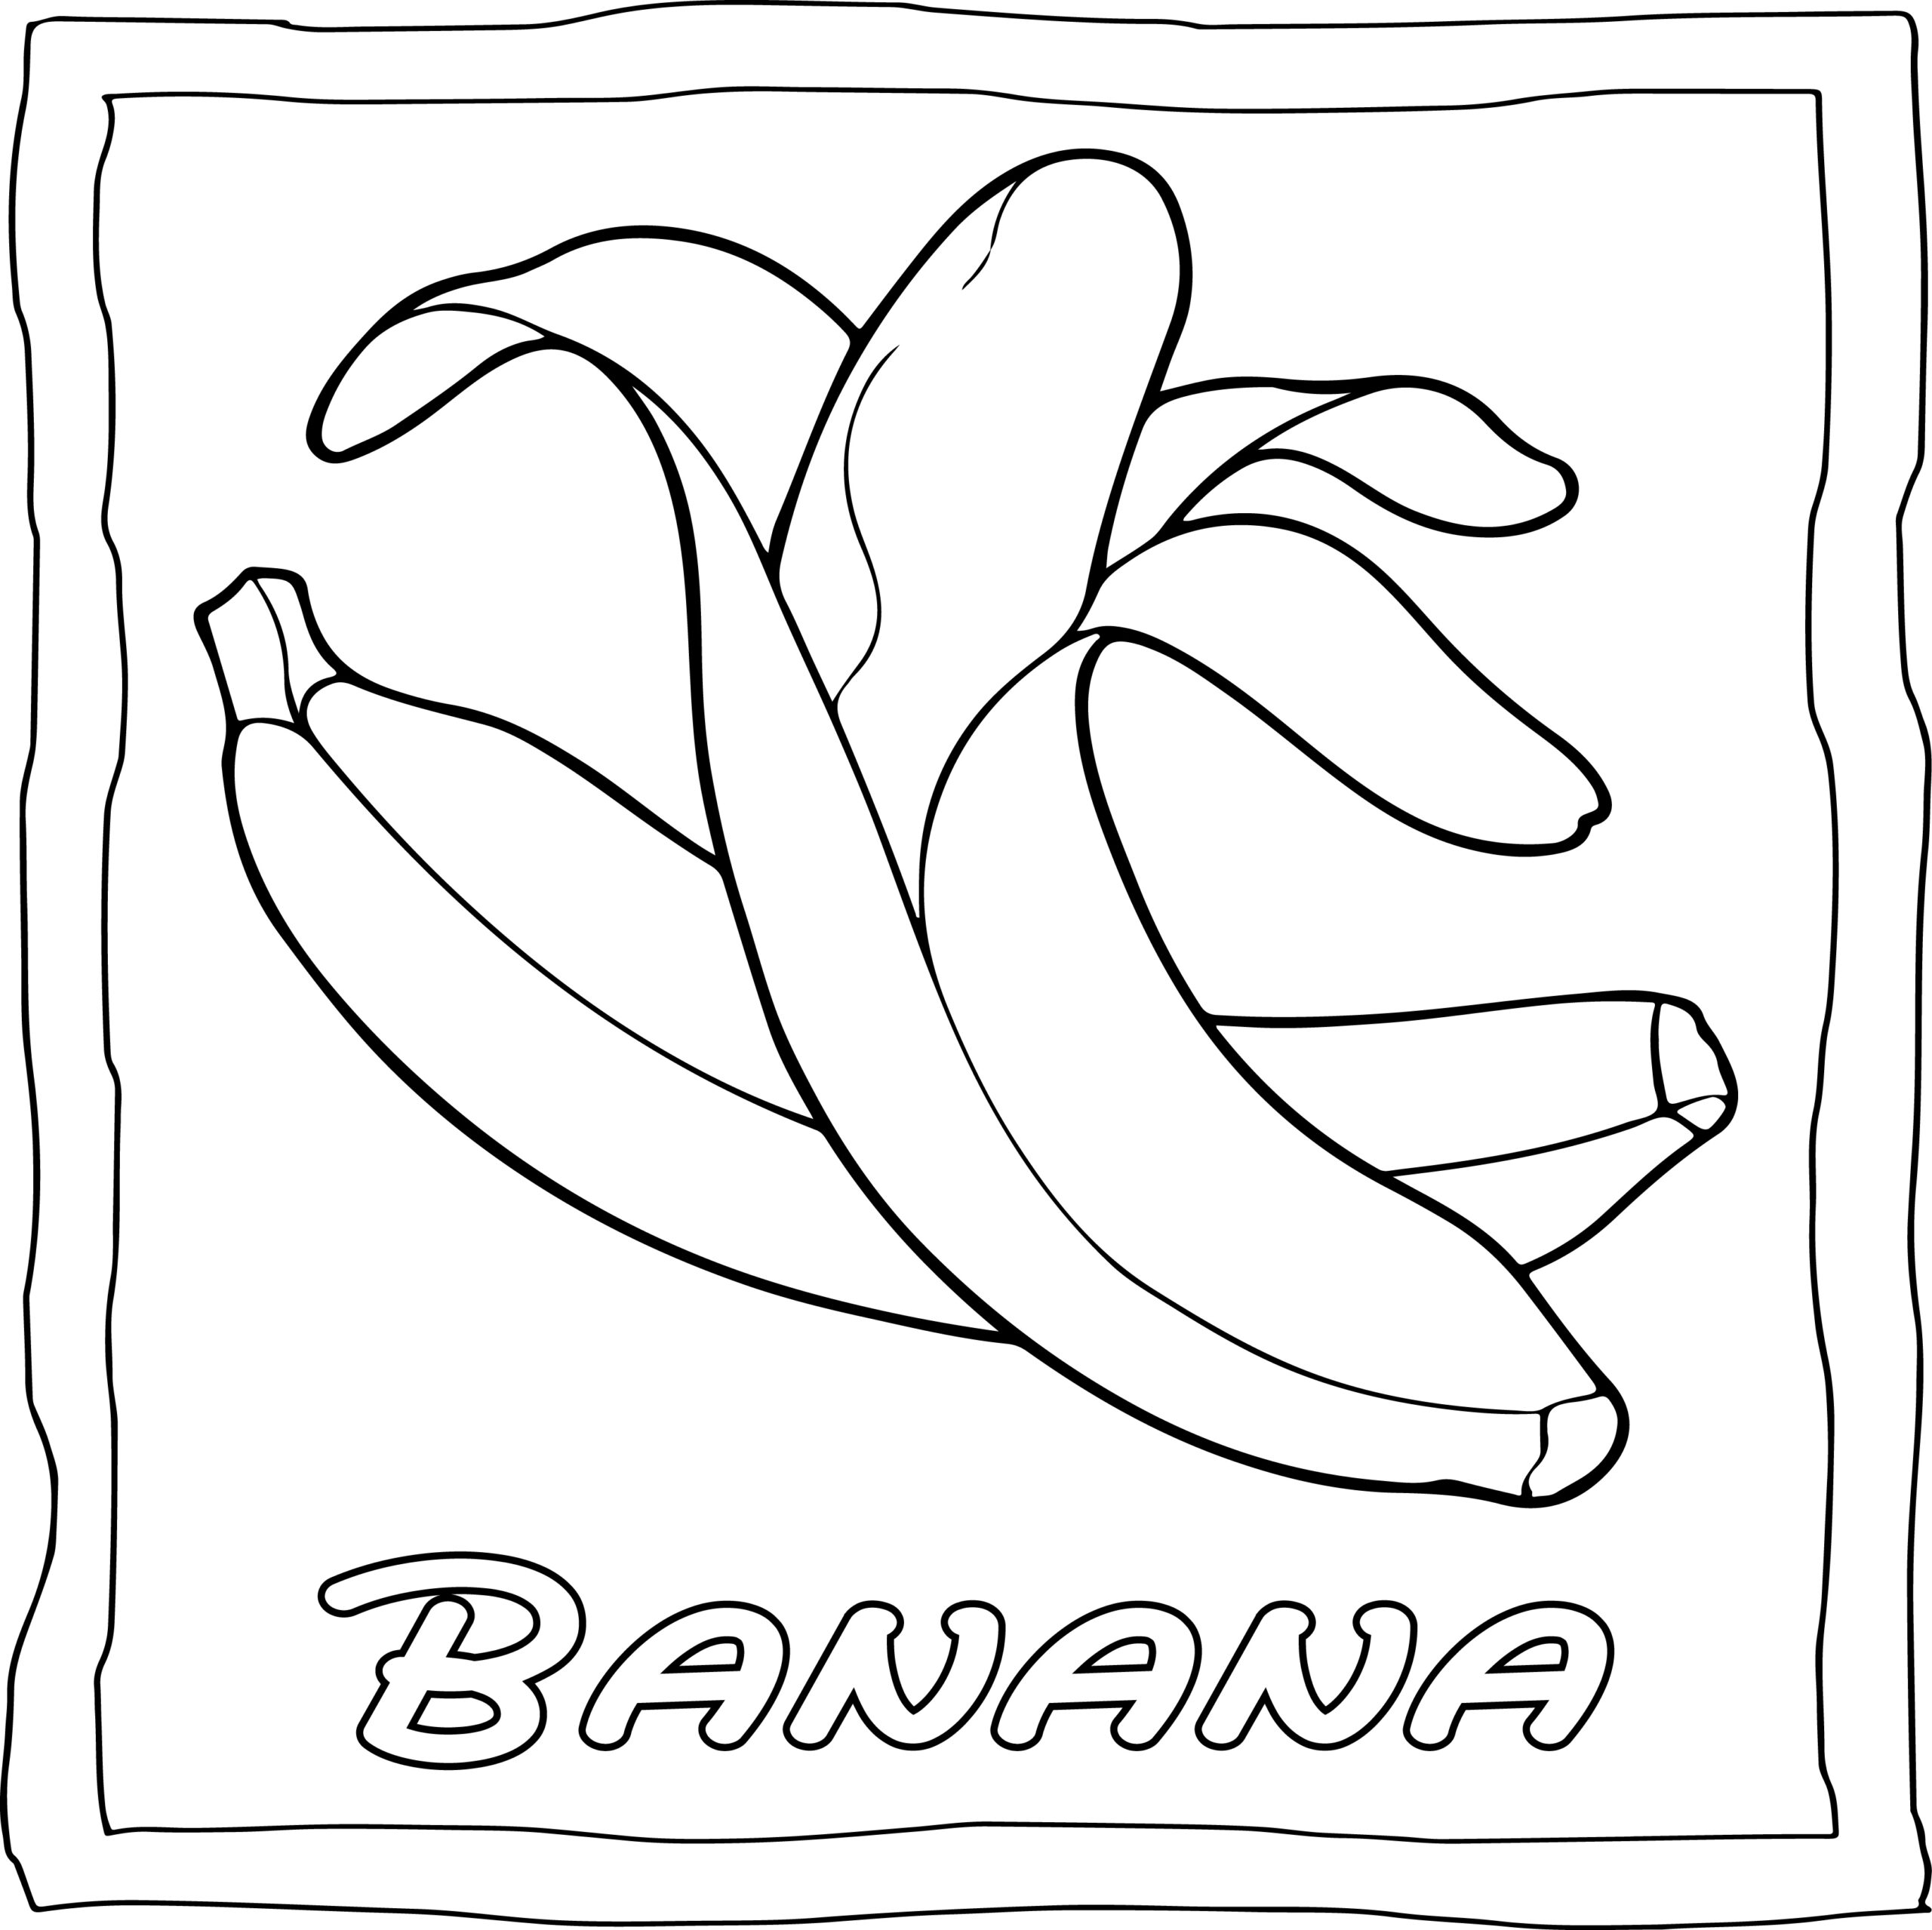 Fruits coloring book easy and fun fruits coloring pages for kids made by teachers